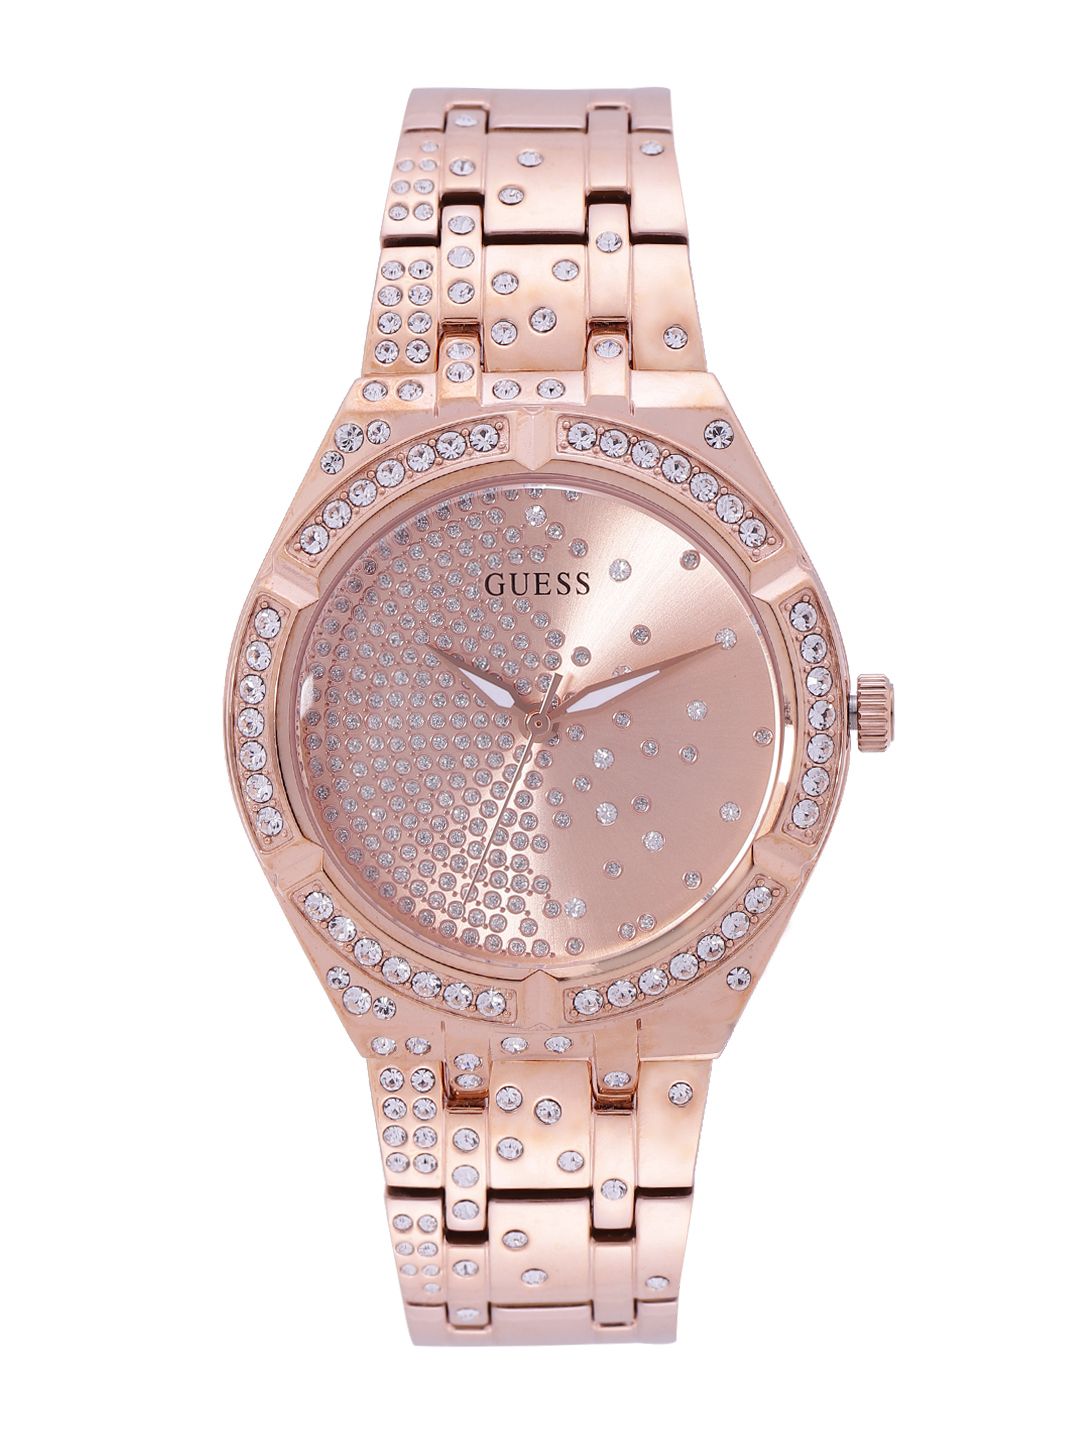 GUESS Women Rose Gold-Toned Embellished Analogue Watch GW0312L3 Price in India